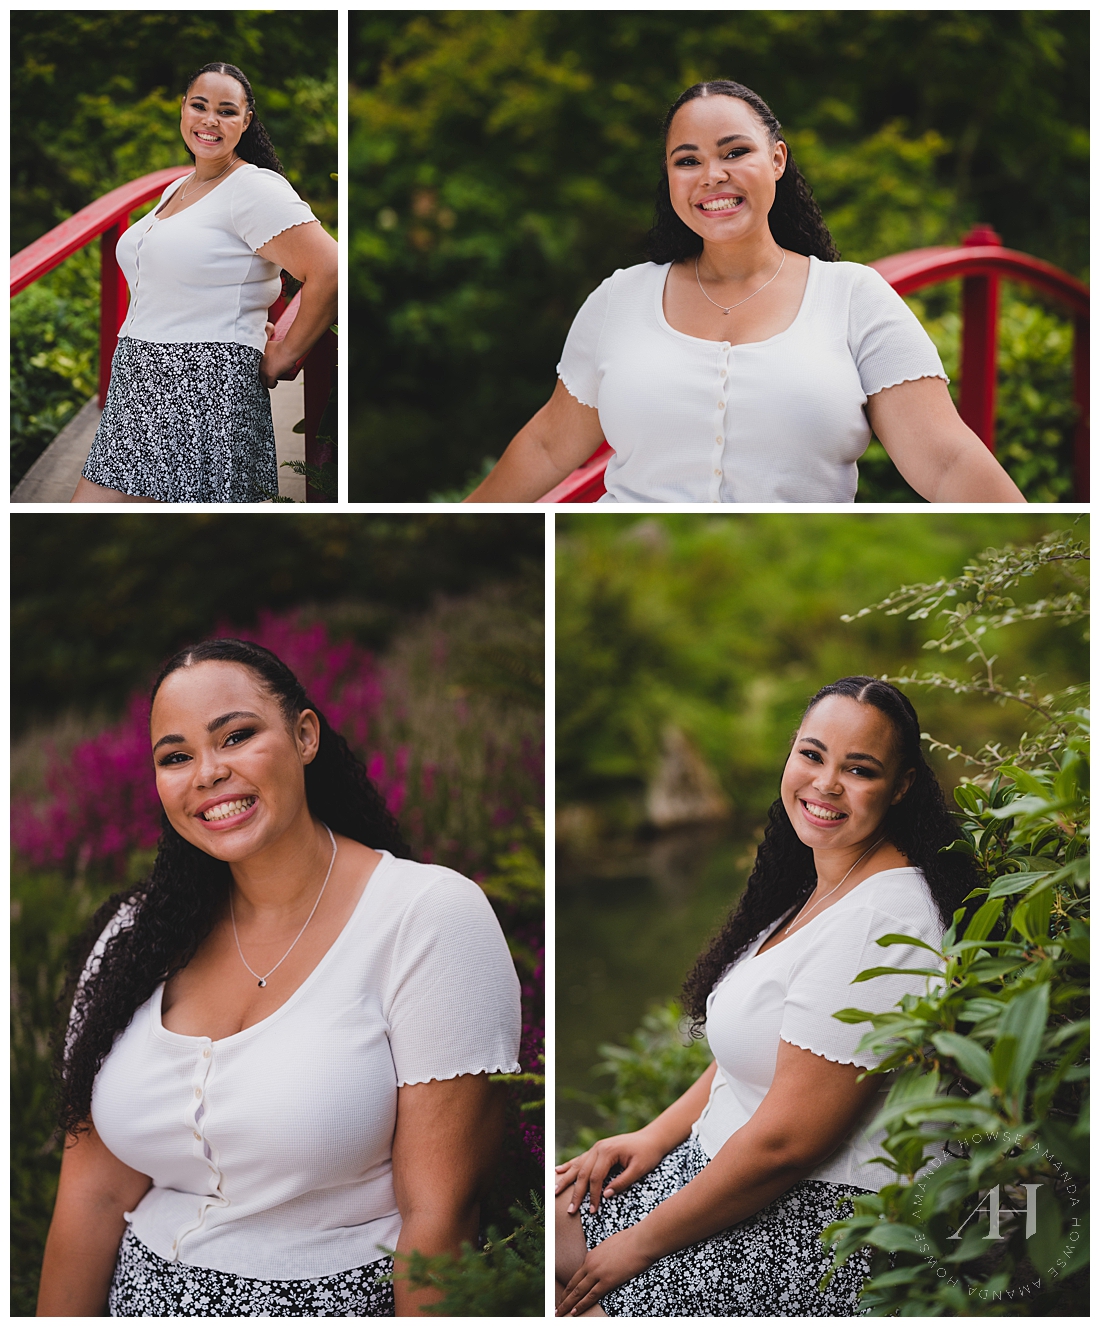 Timeless Senior Photos in Garden | B&W Outfit Ideas, Classic Senior Portraits | Photographed by the Best Tacoma Senior Photographer Amanda Howse Photography